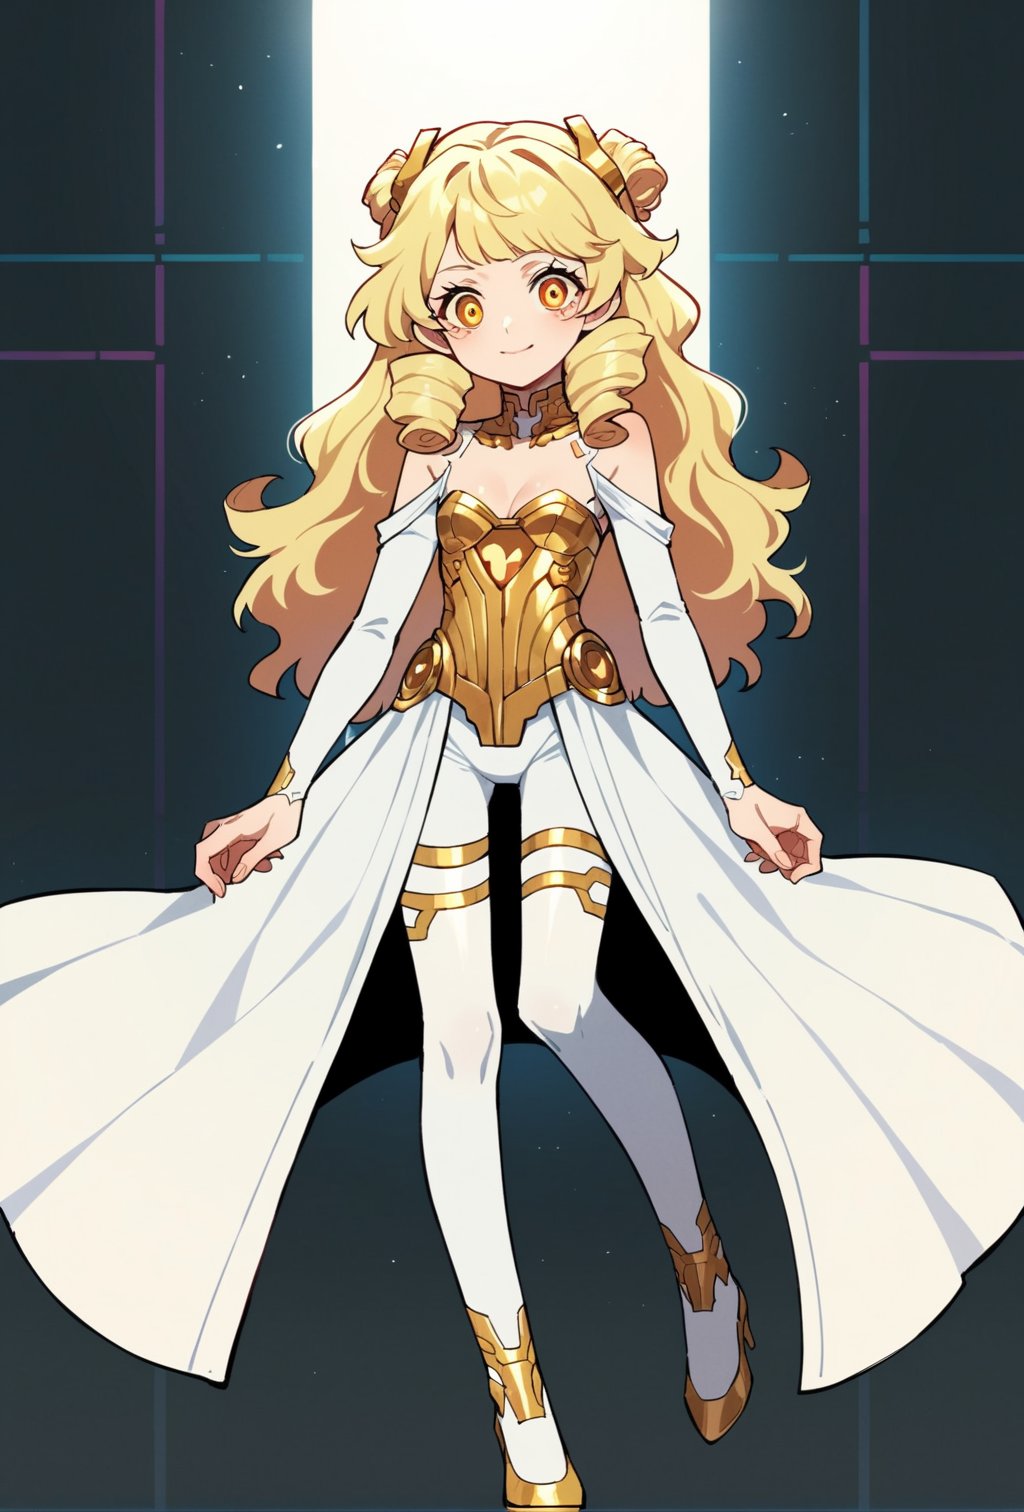 score_9, score_8_up, score_7_up, score_6_up, Takeda hiramitsu style,cyberpunk style,1girl,young female,young adult, very young,blonde hair, curly hair,regal, relaxed shoulders,white clothes, ethereal glow,solo, gold dress, white armored stockings, golden high heels, cleavage, indoor, open eyes, gold cybernetic eyes, long hair,small breasts, side boobs, gentle smile, standi